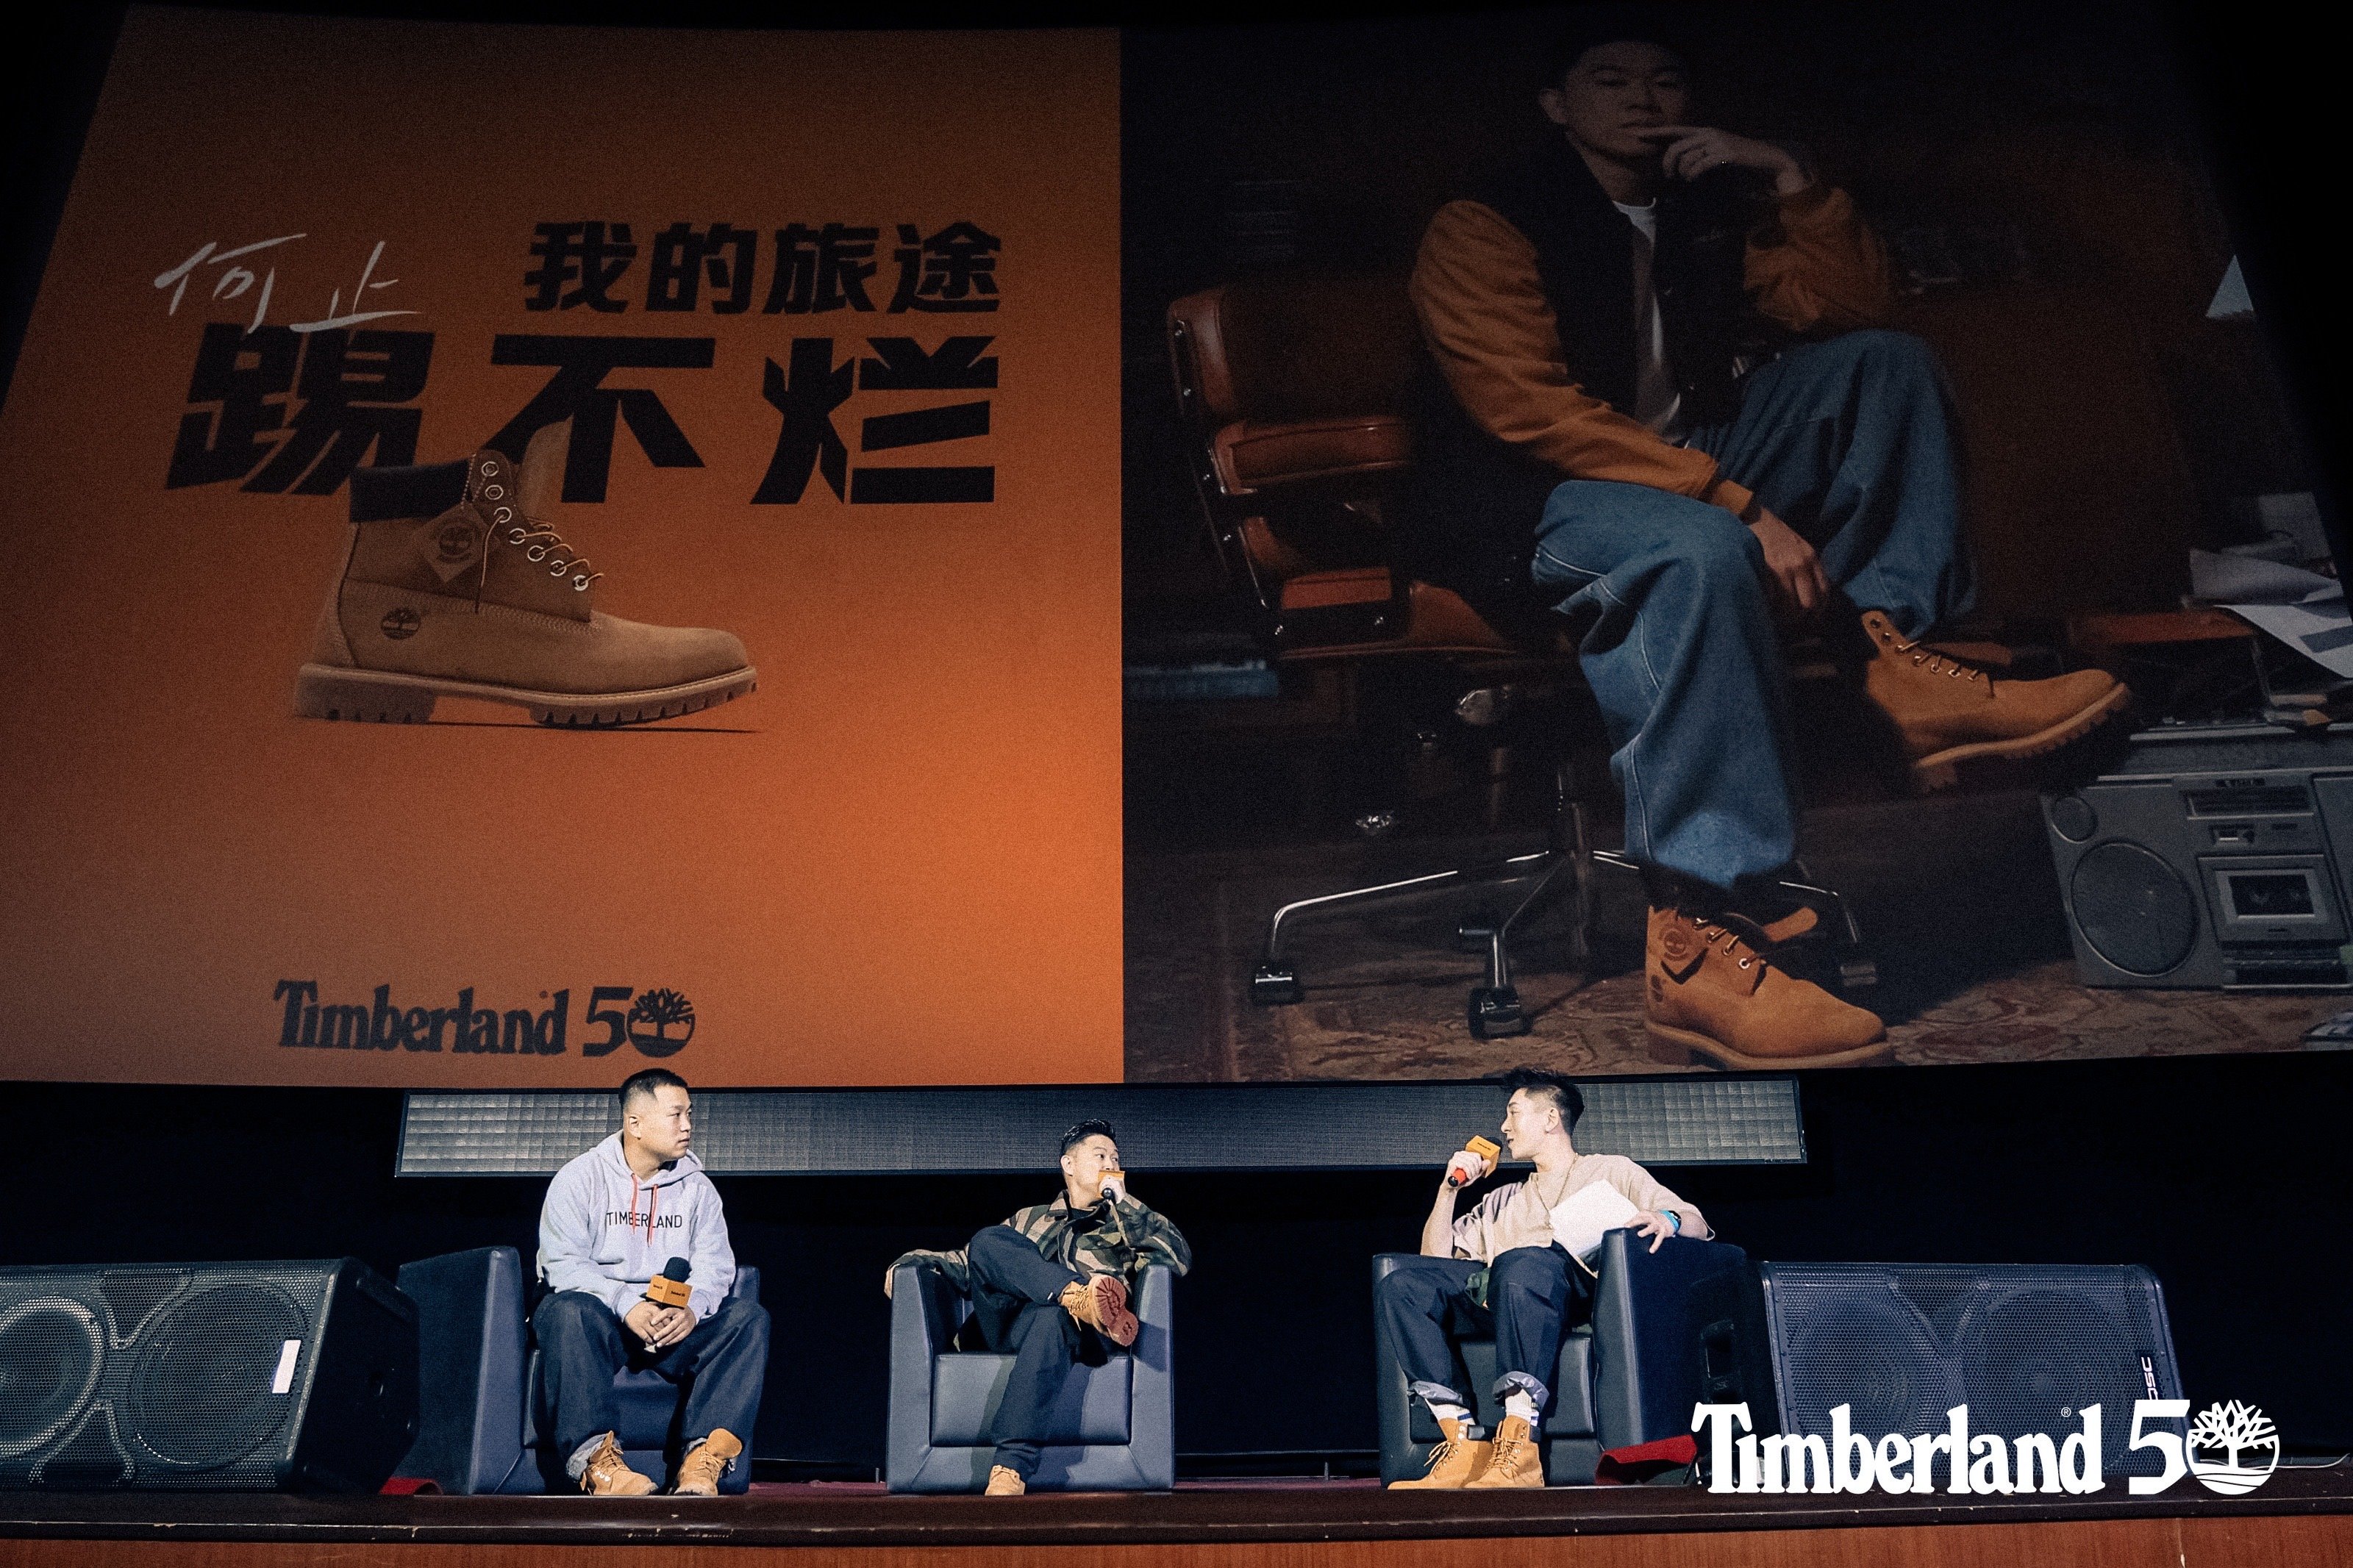 TIMBERLAND 50 周年，发布品牌纪录片《THIS IS NOT A BOOT: THE STORY 